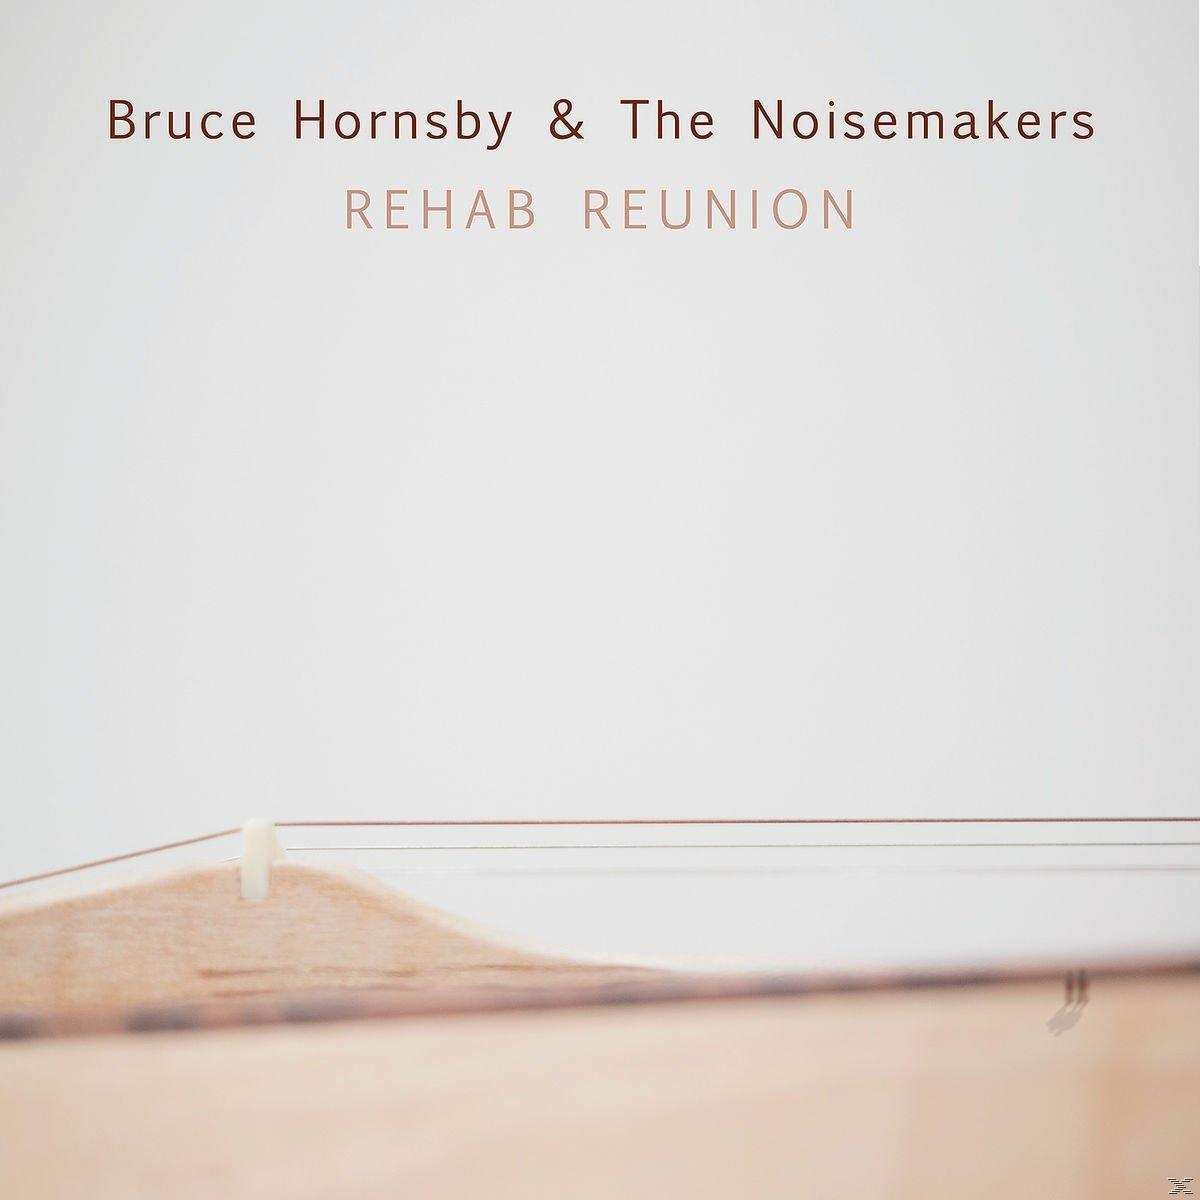 Noisemakers - - & Hornsby Reunion Bruce The (CD) Rehab